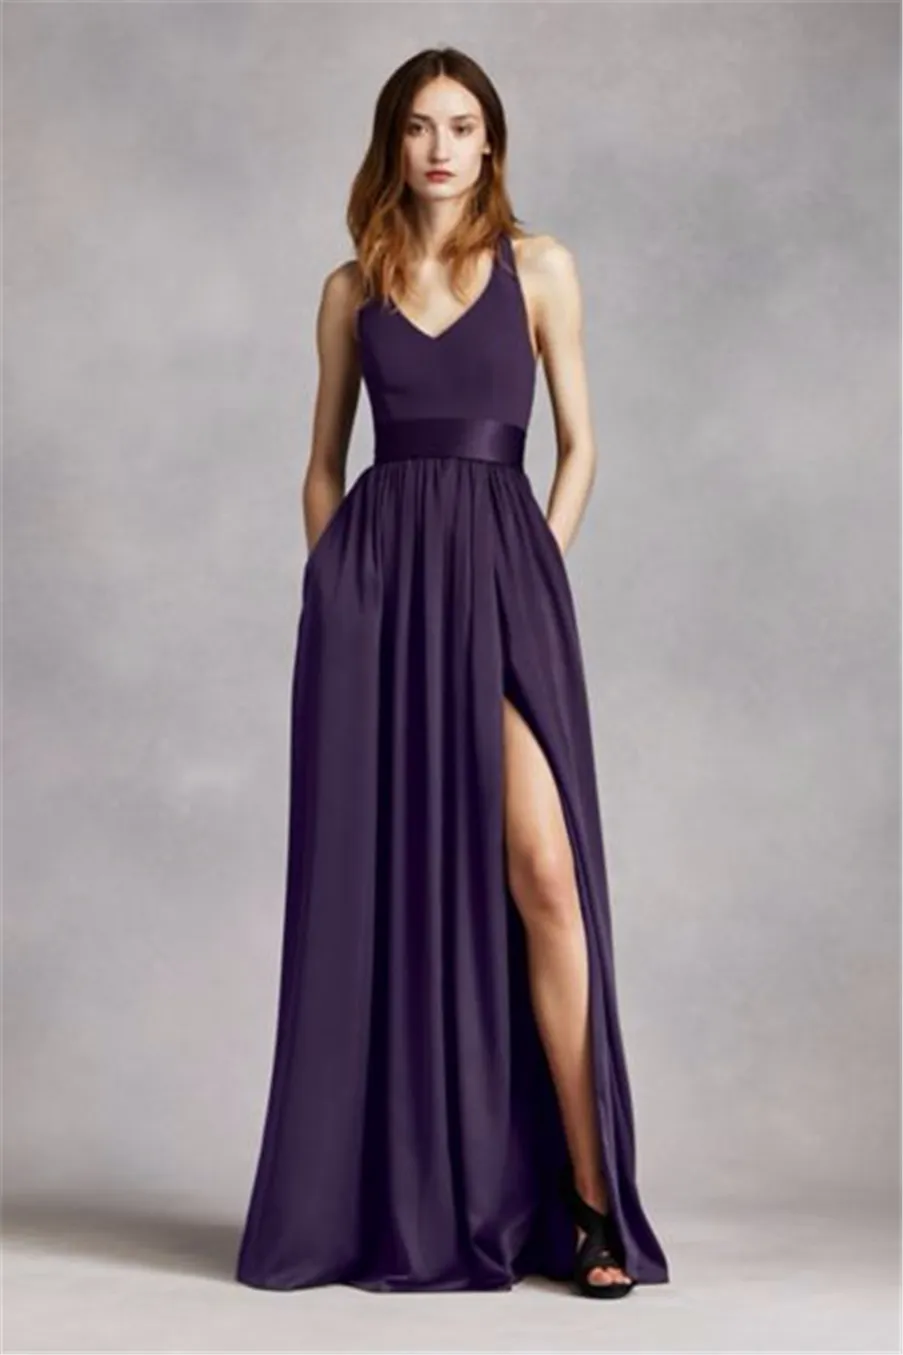 V Neck Halter Neckline Chiffon Front Slit Bridesmaid Dress VW360214 with Sash Wedding Party or Any Special Event